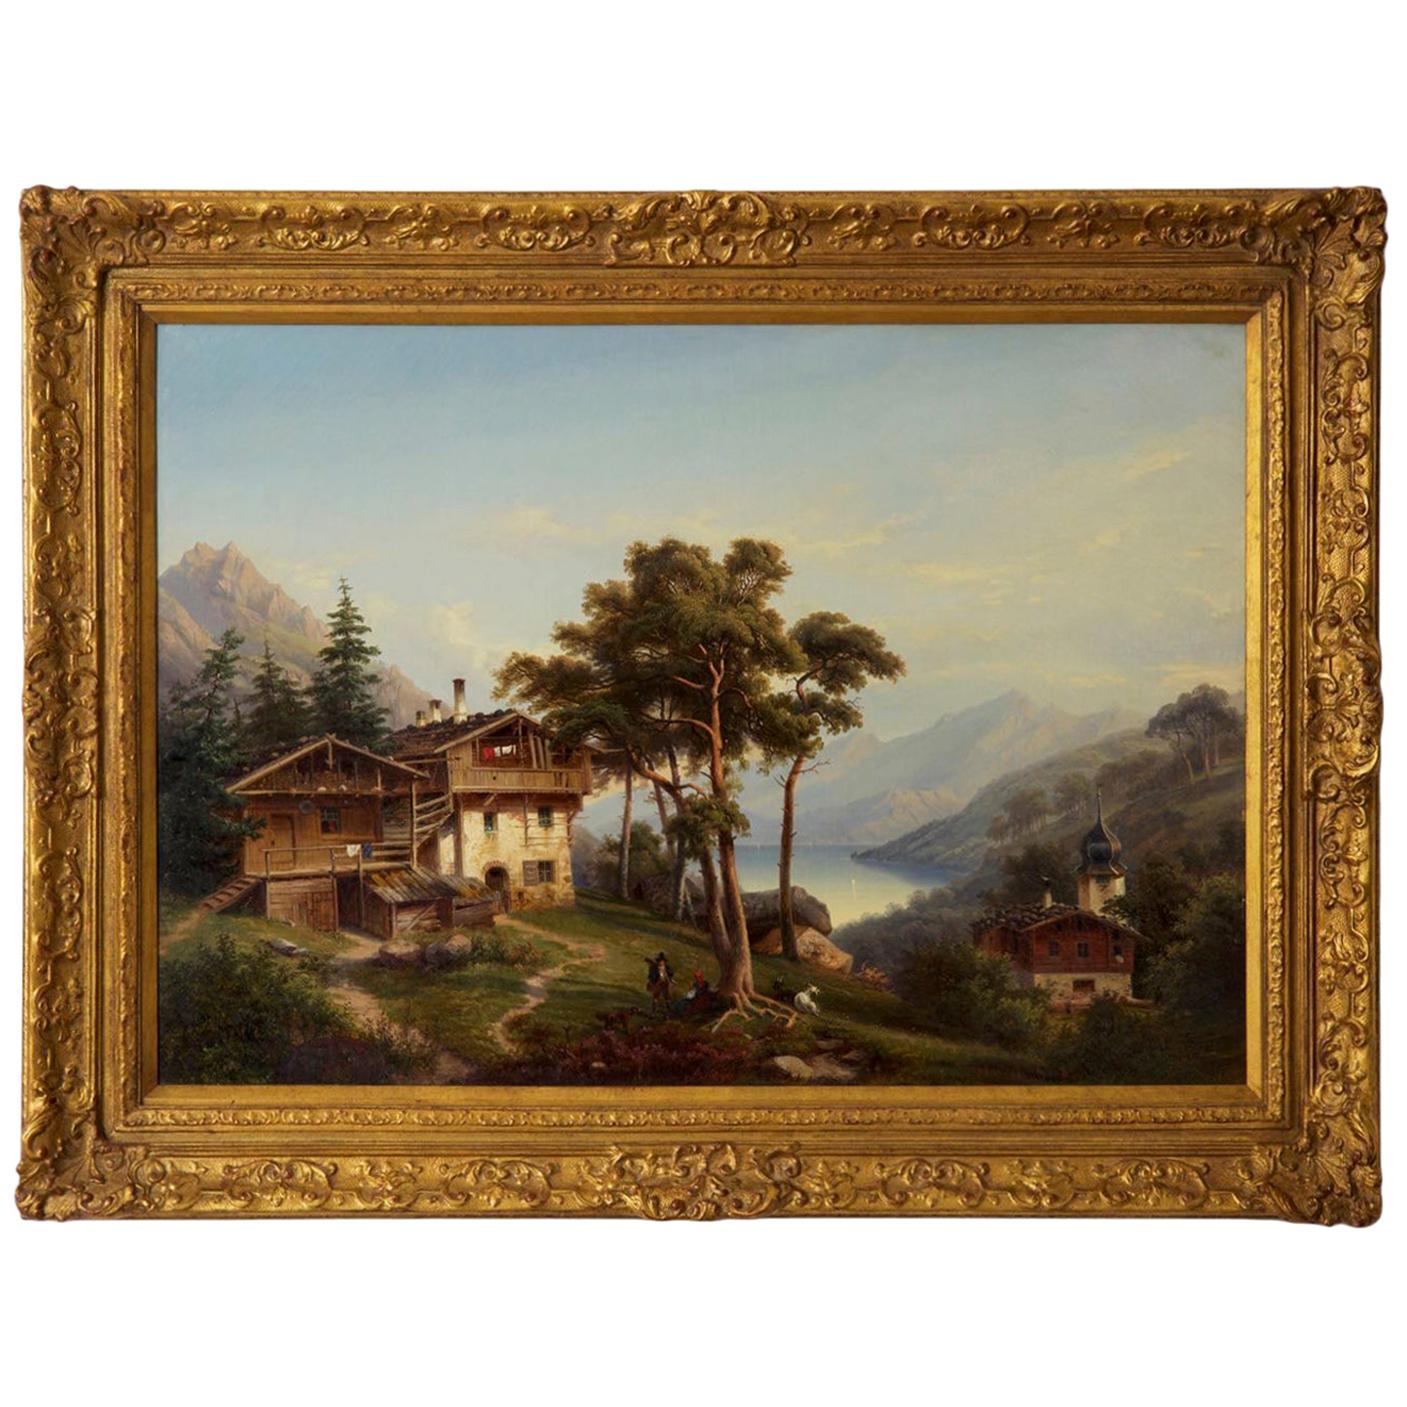 Antique German Landscape Oil Painting of Chalet on Lake by Hermann Seefisch